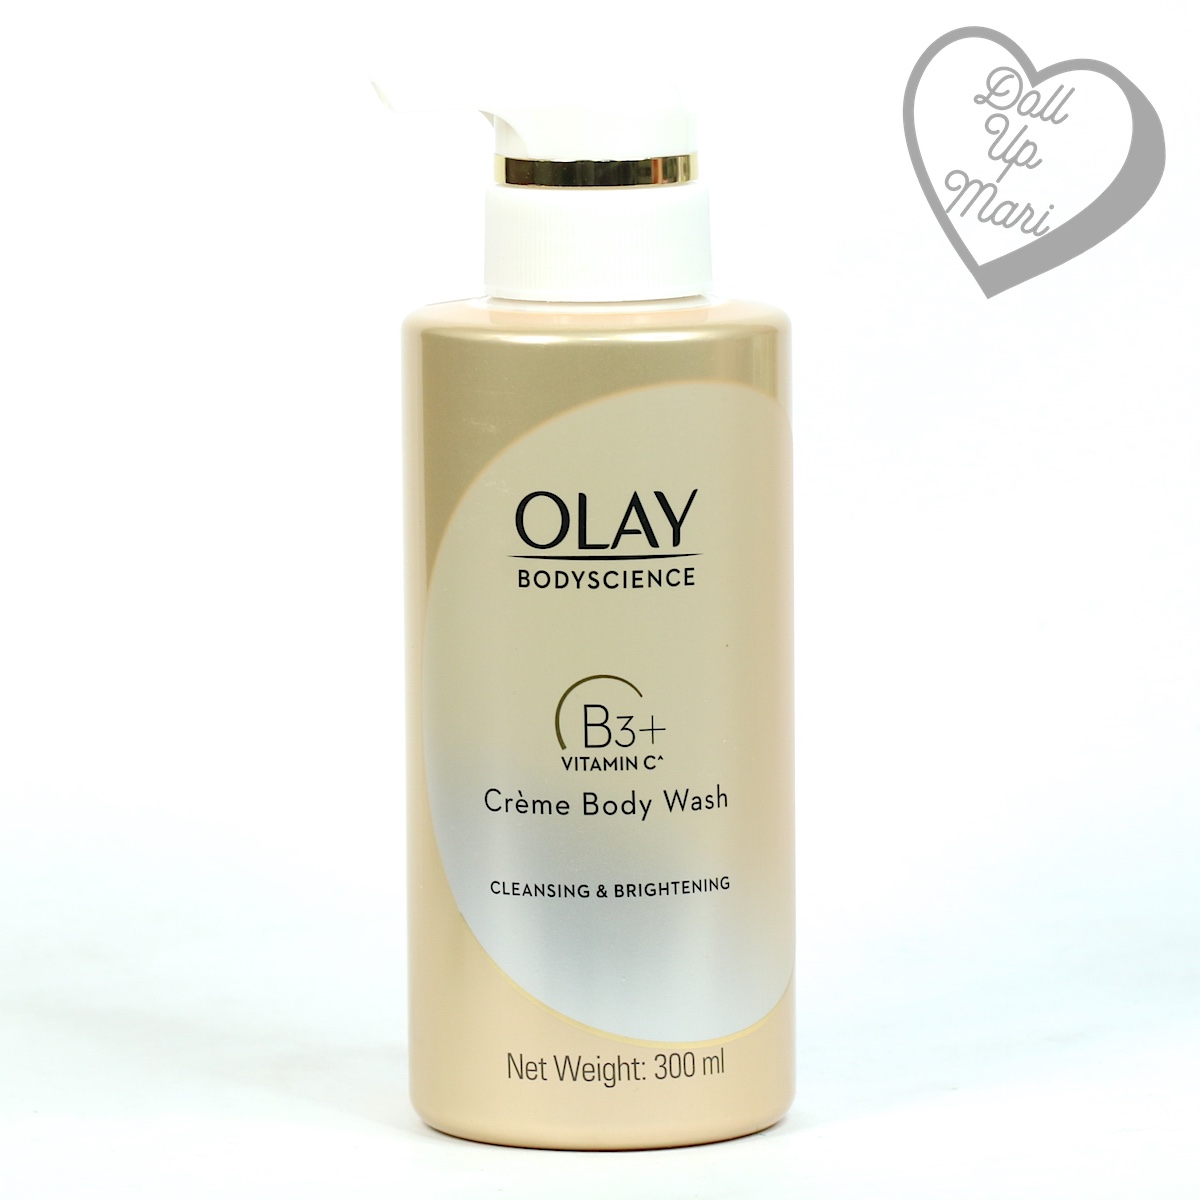 Olay BodyScience Crème Body Wash Cleansing and Brightening with Vitamin C Pack shot